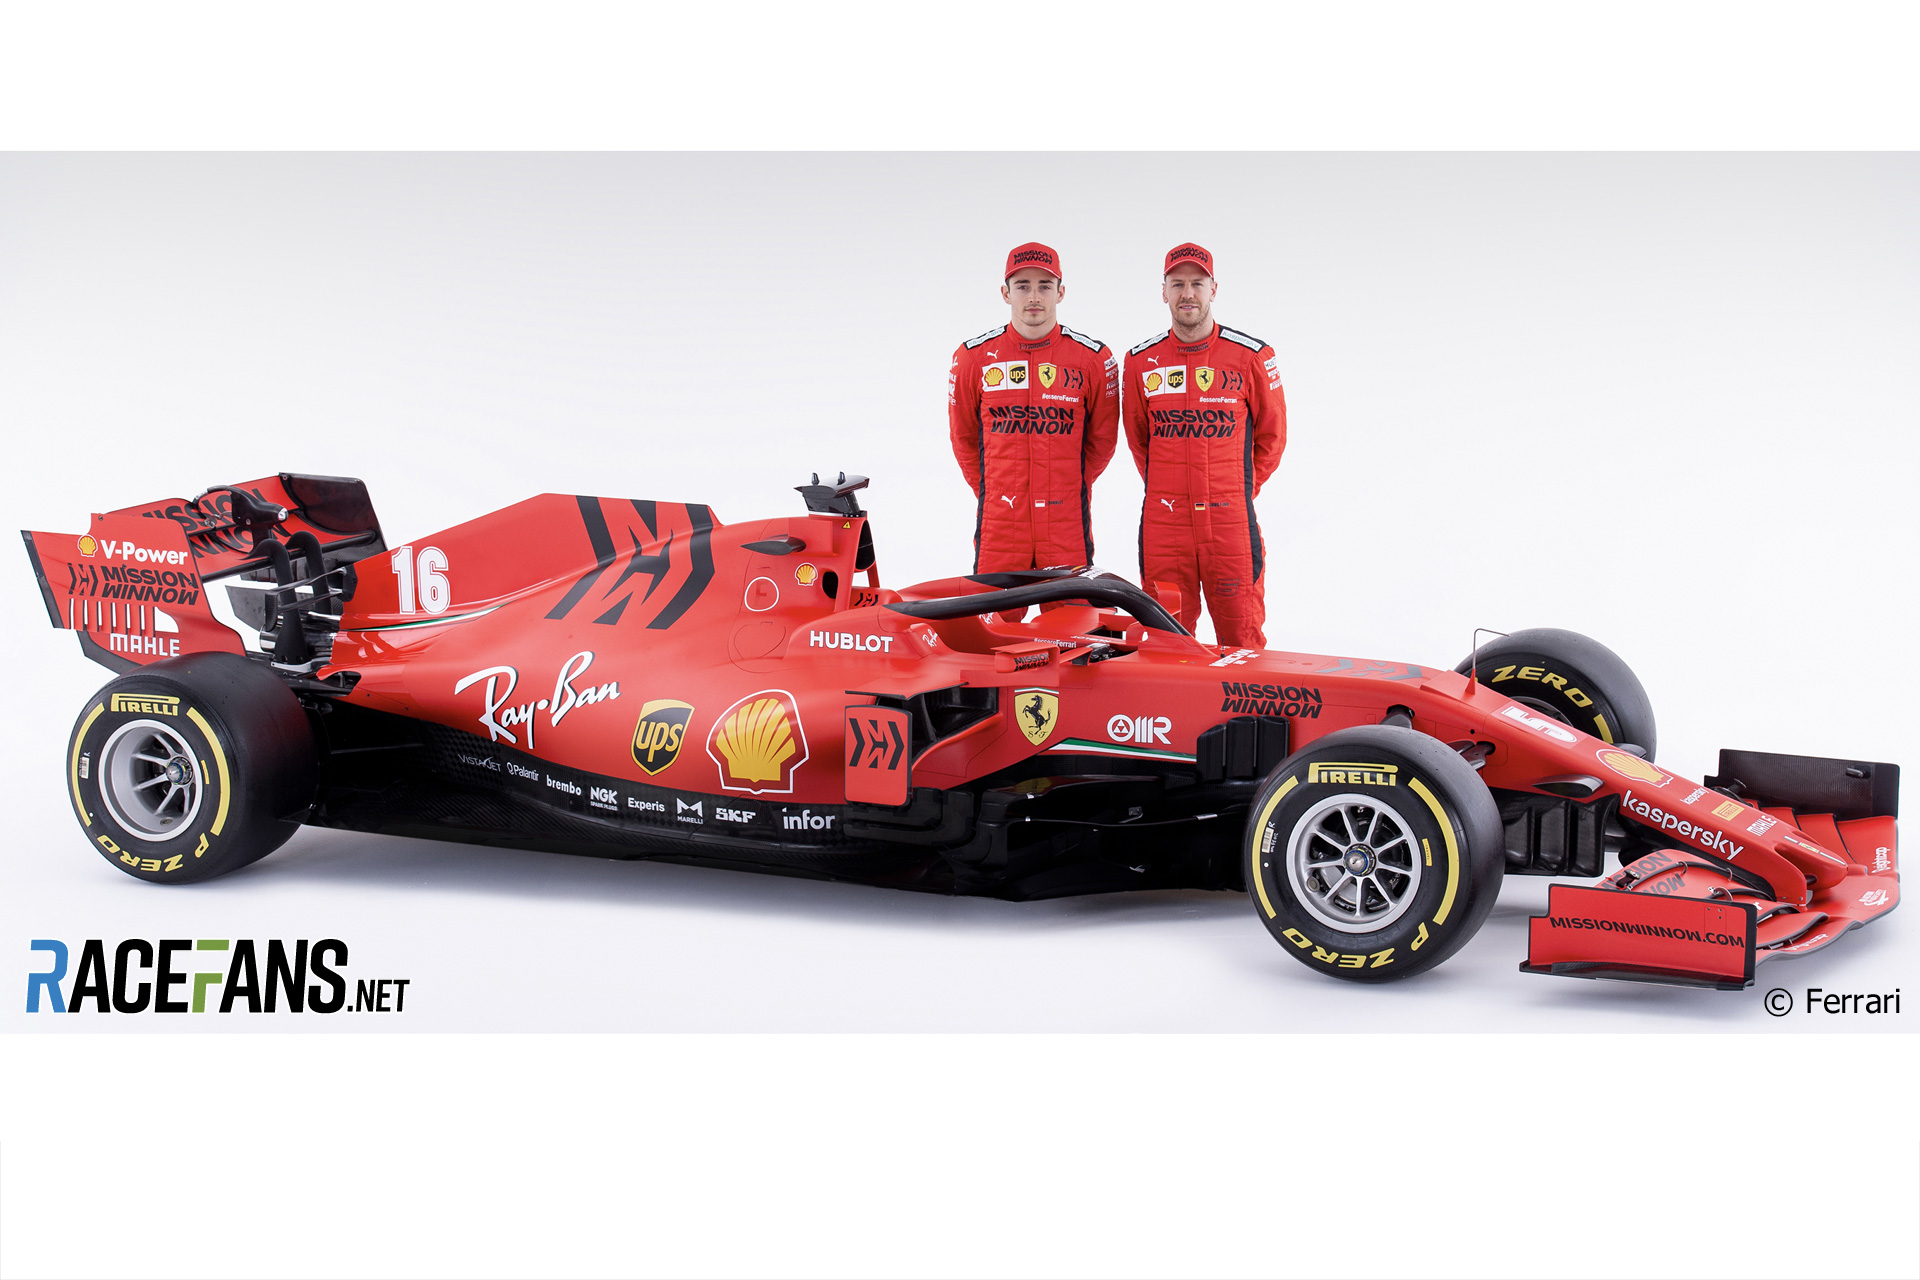 pronunciation Definition Huge F1: Ferrari adopts "let them race" policy for Vettel and Leclerc · RaceFans